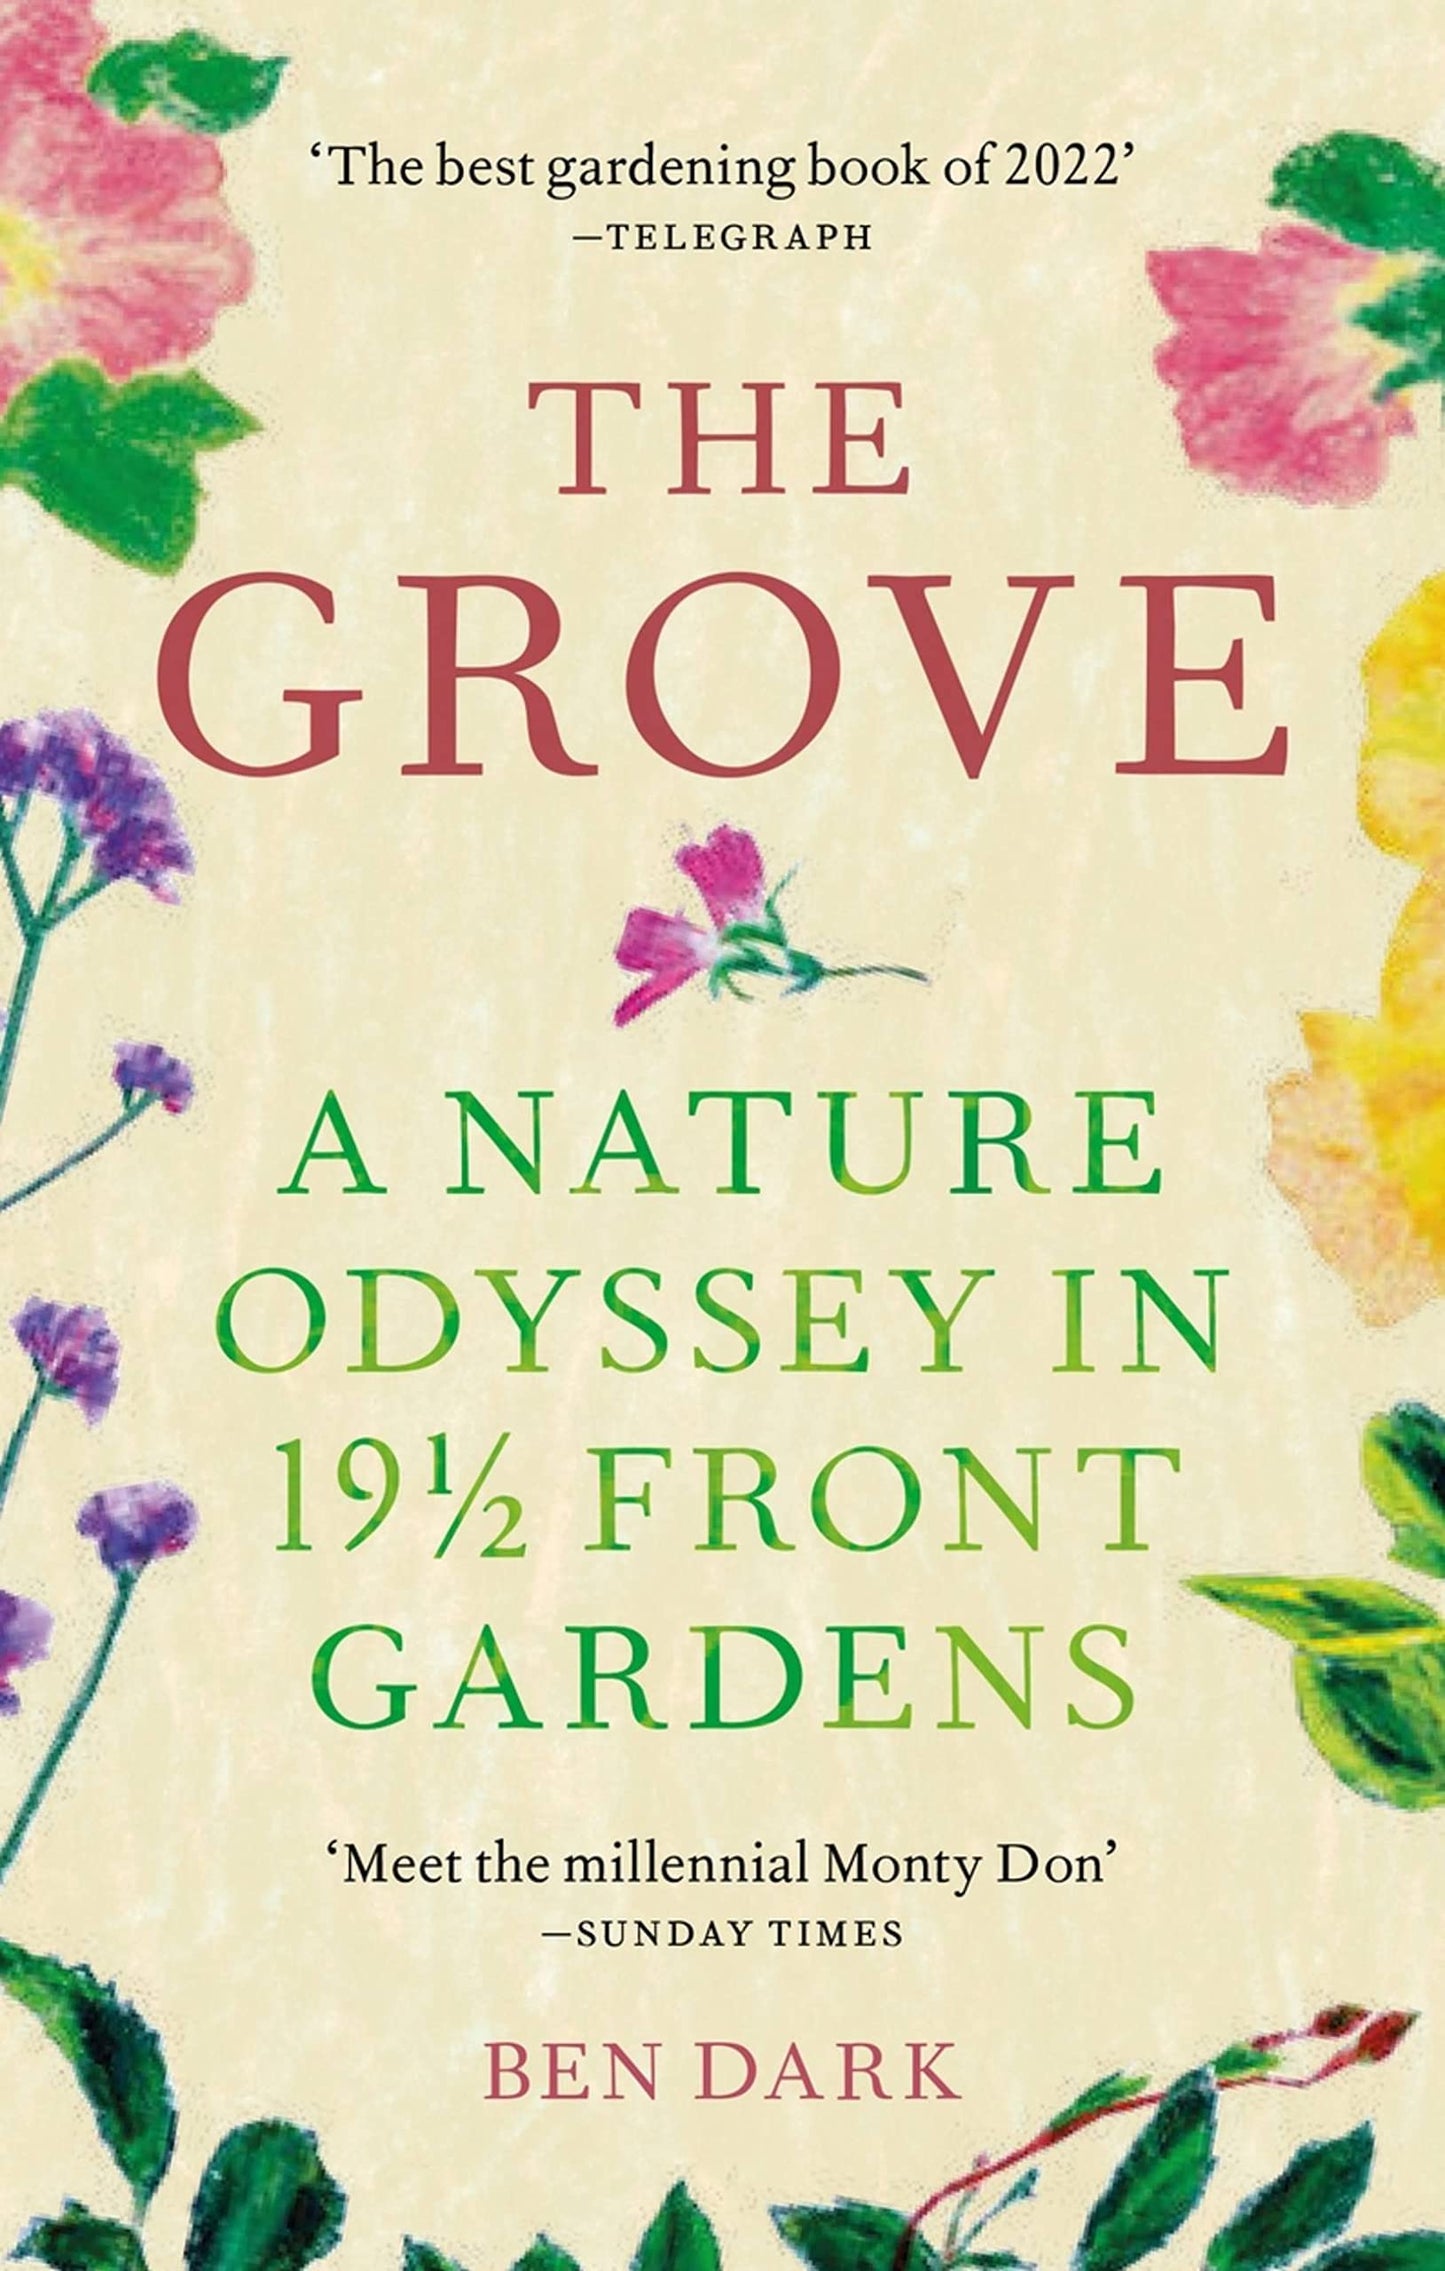 Grove: A Nature Odyssey in 19 1/2 Front Gardens